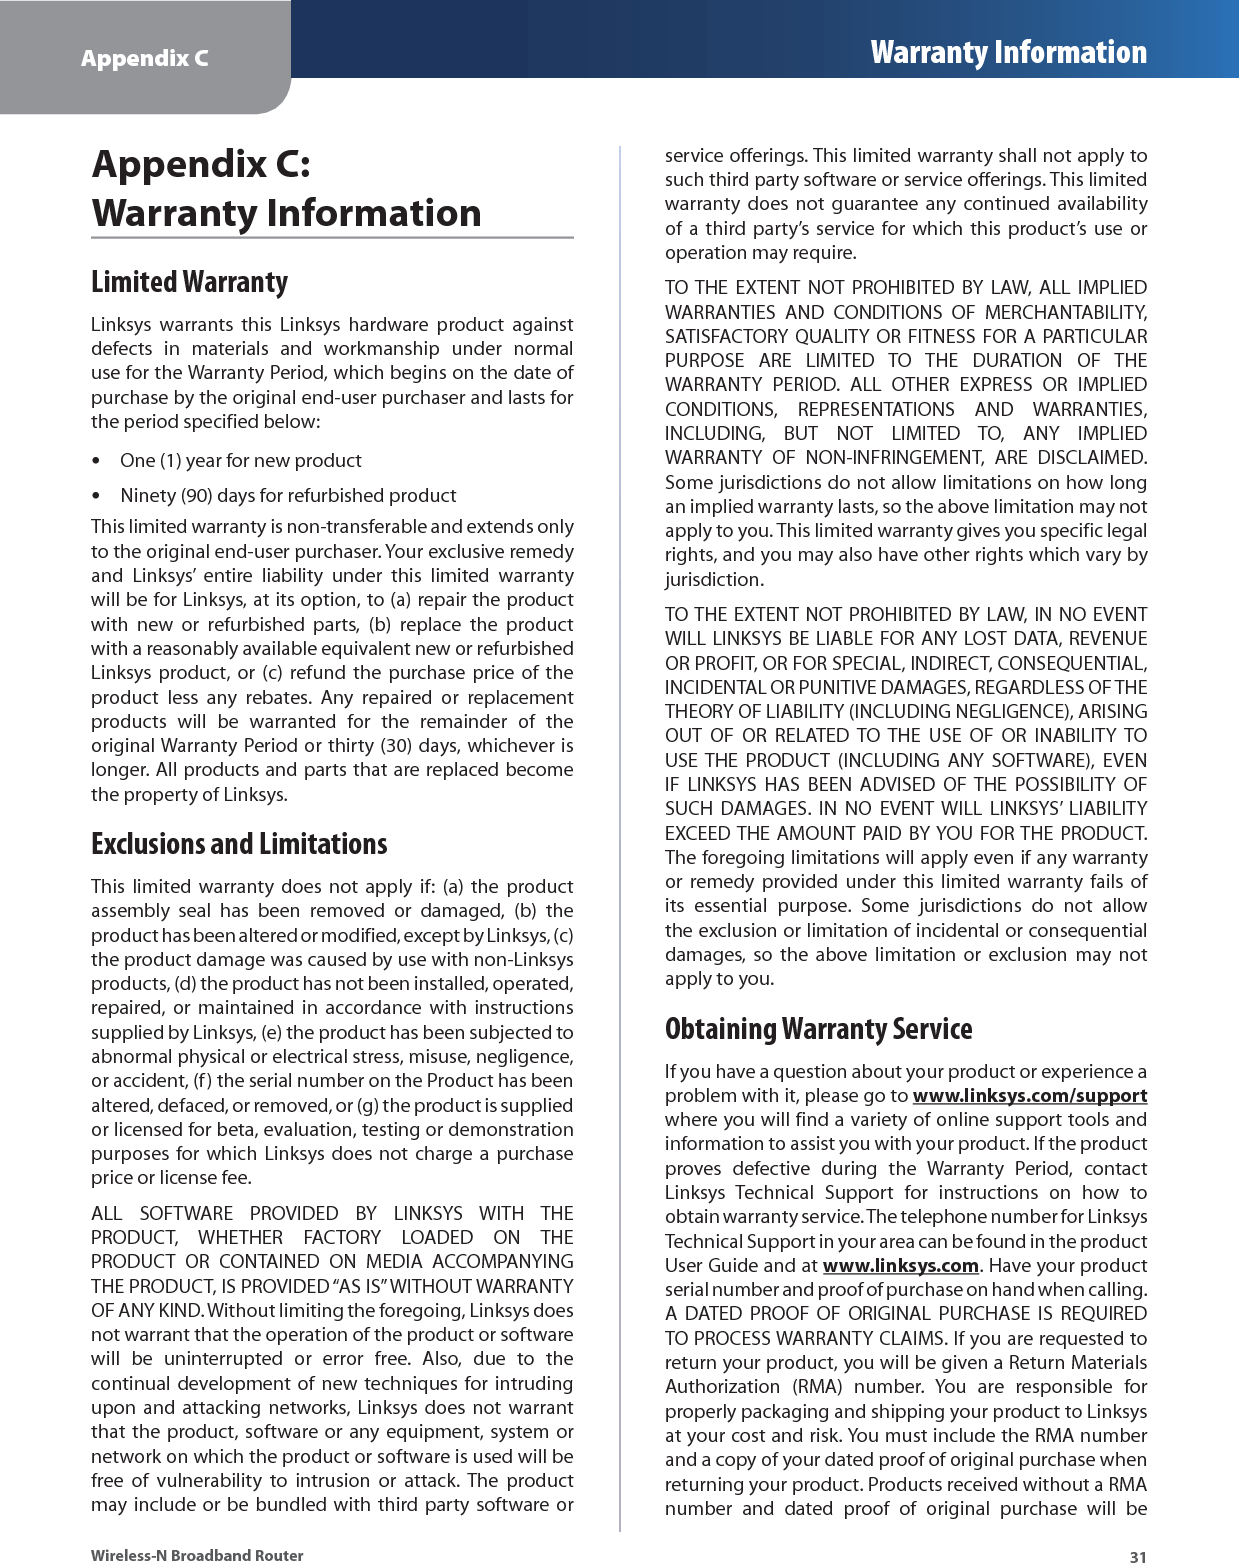 Appendix C Warranty Information31Wireless-N Broadband RouterAppendix C: Warranty InformationLimited WarrantyLinksys warrants this Linksys hardware product against defects in materials and workmanship under normal use for the Warranty Period, which begins on the date of purchase by the original end-user purchaser and lasts for the period specified below:One (1) year for new productNinety (90) days for refurbished productThis limited warranty is non-transferable and extends only to the original end-user purchaser. Your exclusive remedy and Linksys’ entire liability under this limited warranty will be for Linksys, at its option, to (a) repair the product with new or refurbished parts, (b) replace the product with a reasonably available equivalent new or refurbished Linksys product, or (c) refund the purchase price of the product less any rebates. Any repaired or replacement products will be warranted for the remainder of the original Warranty Period or thirty (30) days, whichever is longer. All products and parts that are replaced become the property of Linksys.Exclusions and LimitationsThis limited warranty does not apply if: (a) the product assembly seal has been removed or damaged, (b) the product has been altered or modified, except by Linksys, (c) the product damage was caused by use with non-Linksys products, (d) the product has not been installed, operated, repaired, or maintained in accordance with instructions supplied by Linksys, (e) the product has been subjected to abnormal physical or electrical stress, misuse, negligence, or accident, (f) the serial number on the Product has been altered, defaced, or removed, or (g) the product is supplied or licensed for beta, evaluation, testing or demonstration purposes for which Linksys does not charge a purchase price or license fee.ALL SOFTWARE PROVIDED BY LINKSYS WITH THE PRODUCT, WHETHER FACTORY LOADED ON THE PRODUCT OR CONTAINED ON MEDIA ACCOMPANYING THE PRODUCT, IS PROVIDED “AS IS” WITHOUT WARRANTY OF ANY KIND. Without limiting the foregoing, Linksys does not warrant that the operation of the product or software will be uninterrupted or error free. Also, due to the continual development of new techniques for intruding upon and attacking networks, Linksys does not warrant that the product, software or any equipment, system or network on which the product or software is used will be free of vulnerability to intrusion or attack. The product may include or be bundled with third party software or ••service offerings. This limited warranty shall not apply to such third party software or service offerings. This limited warranty does not guarantee any continued availability of a third party’s service for which this product’s use or operation may require. TO THE EXTENT NOT PROHIBITED BY LAW, ALL IMPLIED WARRANTIES AND CONDITIONS OF MERCHANTABILITY, SATISFACTORY QUALITY OR FITNESS FOR A PARTICULAR PURPOSE ARE LIMITED TO THE DURATION OF THE WARRANTY PERIOD. ALL OTHER EXPRESS OR IMPLIED CONDITIONS, REPRESENTATIONS AND WARRANTIES, INCLUDING, BUT NOT LIMITED TO, ANY IMPLIED WARRANTY OF NON-INFRINGEMENT, ARE DISCLAIMED. Some jurisdictions do not allow limitations on how long an implied warranty lasts, so the above limitation may not apply to you. This limited warranty gives you specific legal rights, and you may also have other rights which vary by jurisdiction.TO THE EXTENT NOT PROHIBITED BY LAW, IN NO EVENT WILL LINKSYS BE LIABLE FOR ANY LOST DATA, REVENUE OR PROFIT, OR FOR SPECIAL, INDIRECT, CONSEQUENTIAL, INCIDENTAL OR PUNITIVE DAMAGES, REGARDLESS OF THE THEORY OF LIABILITY (INCLUDING NEGLIGENCE), ARISING OUT OF OR RELATED TO THE USE OF OR INABILITY TO USE THE PRODUCT (INCLUDING ANY SOFTWARE), EVEN IF LINKSYS HAS BEEN ADVISED OF THE POSSIBILITY OF SUCH DAMAGES. IN NO EVENT WILL LINKSYS’ LIABILITY EXCEED THE AMOUNT PAID BY YOU FOR THE PRODUCT. The foregoing limitations will apply even if any warranty or remedy provided under this limited warranty fails of its essential purpose. Some jurisdictions do not allow the exclusion or limitation of incidental or consequential damages, so the above limitation or exclusion may not apply to you.Obtaining Warranty ServiceIf you have a question about your product or experience a problem with it, please go to www.linksys.com/supportwhere you will find a variety of online support tools and information to assist you with your product. If the product proves defective during the Warranty Period, contact Linksys Technical Support for instructions on how to obtain warranty service. The telephone number for Linksys Technical Support in your area can be found in the product User Guide and at www.linksys.com. Have your product serial number and proof of purchase on hand when calling. A DATED PROOF OF ORIGINAL PURCHASE IS REQUIRED TO PROCESS WARRANTY CLAIMS. If you are requested to return your product, you will be given a Return Materials Authorization (RMA) number. You are responsible for properly packaging and shipping your product to Linksys at your cost and risk. You must include the RMA number and a copy of your dated proof of original purchase when returning your product. Products received without a RMA number and dated proof of original purchase will be 